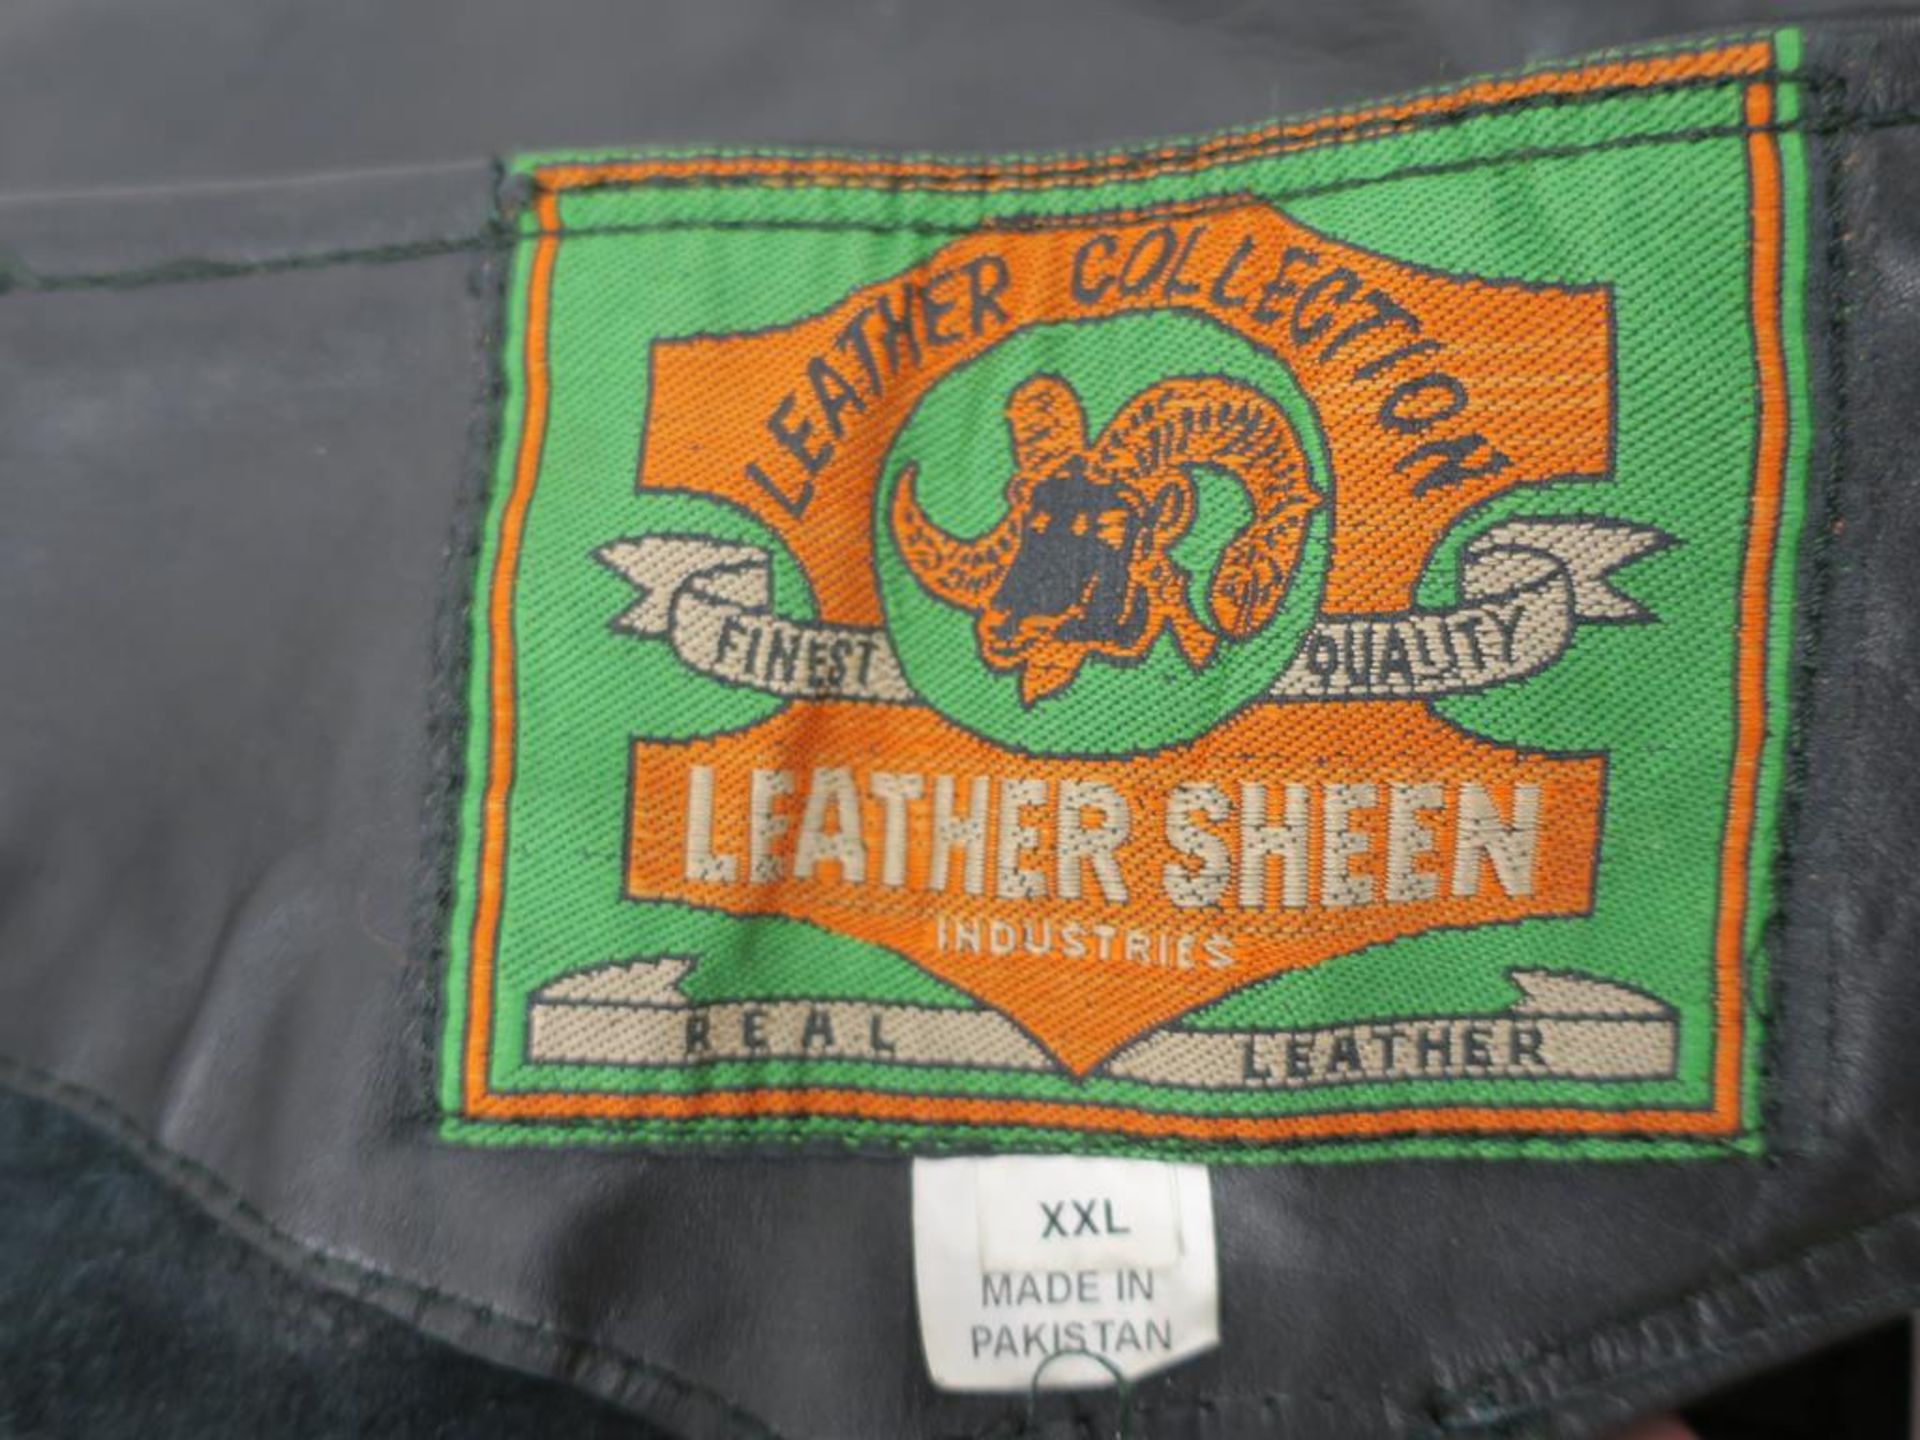 A pair of Harley Davidson (?) Leather Sheen Chaps and Shaf Leather Waistcoat (2) (est £50-£70) - Image 10 of 10